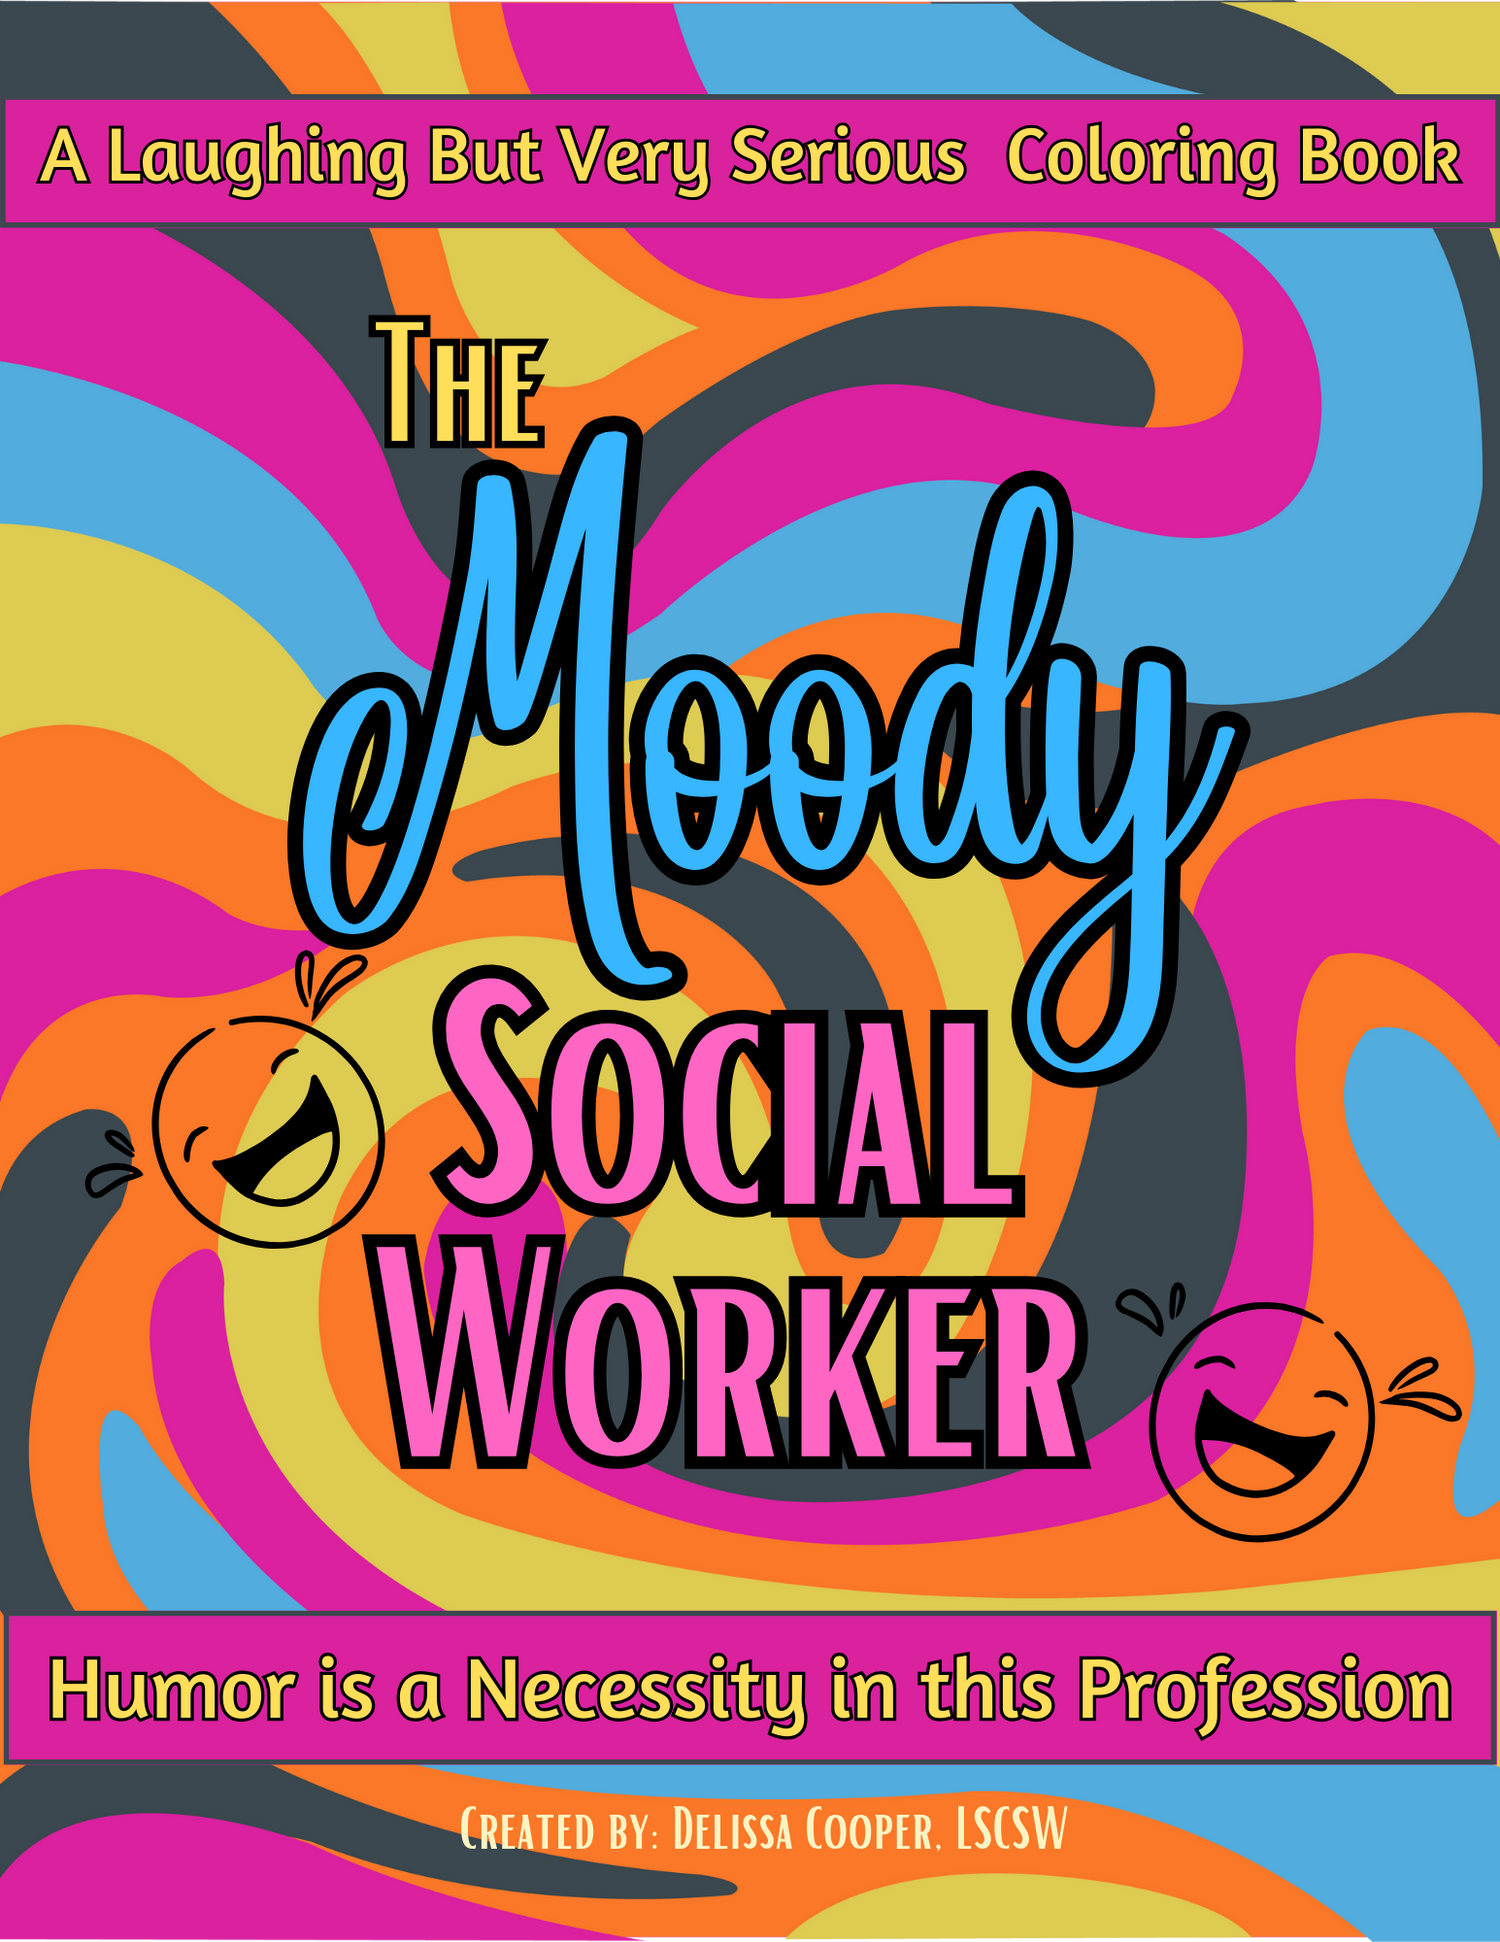 The Moody Social Worker: A Laughing But Very Serious Coloring Book